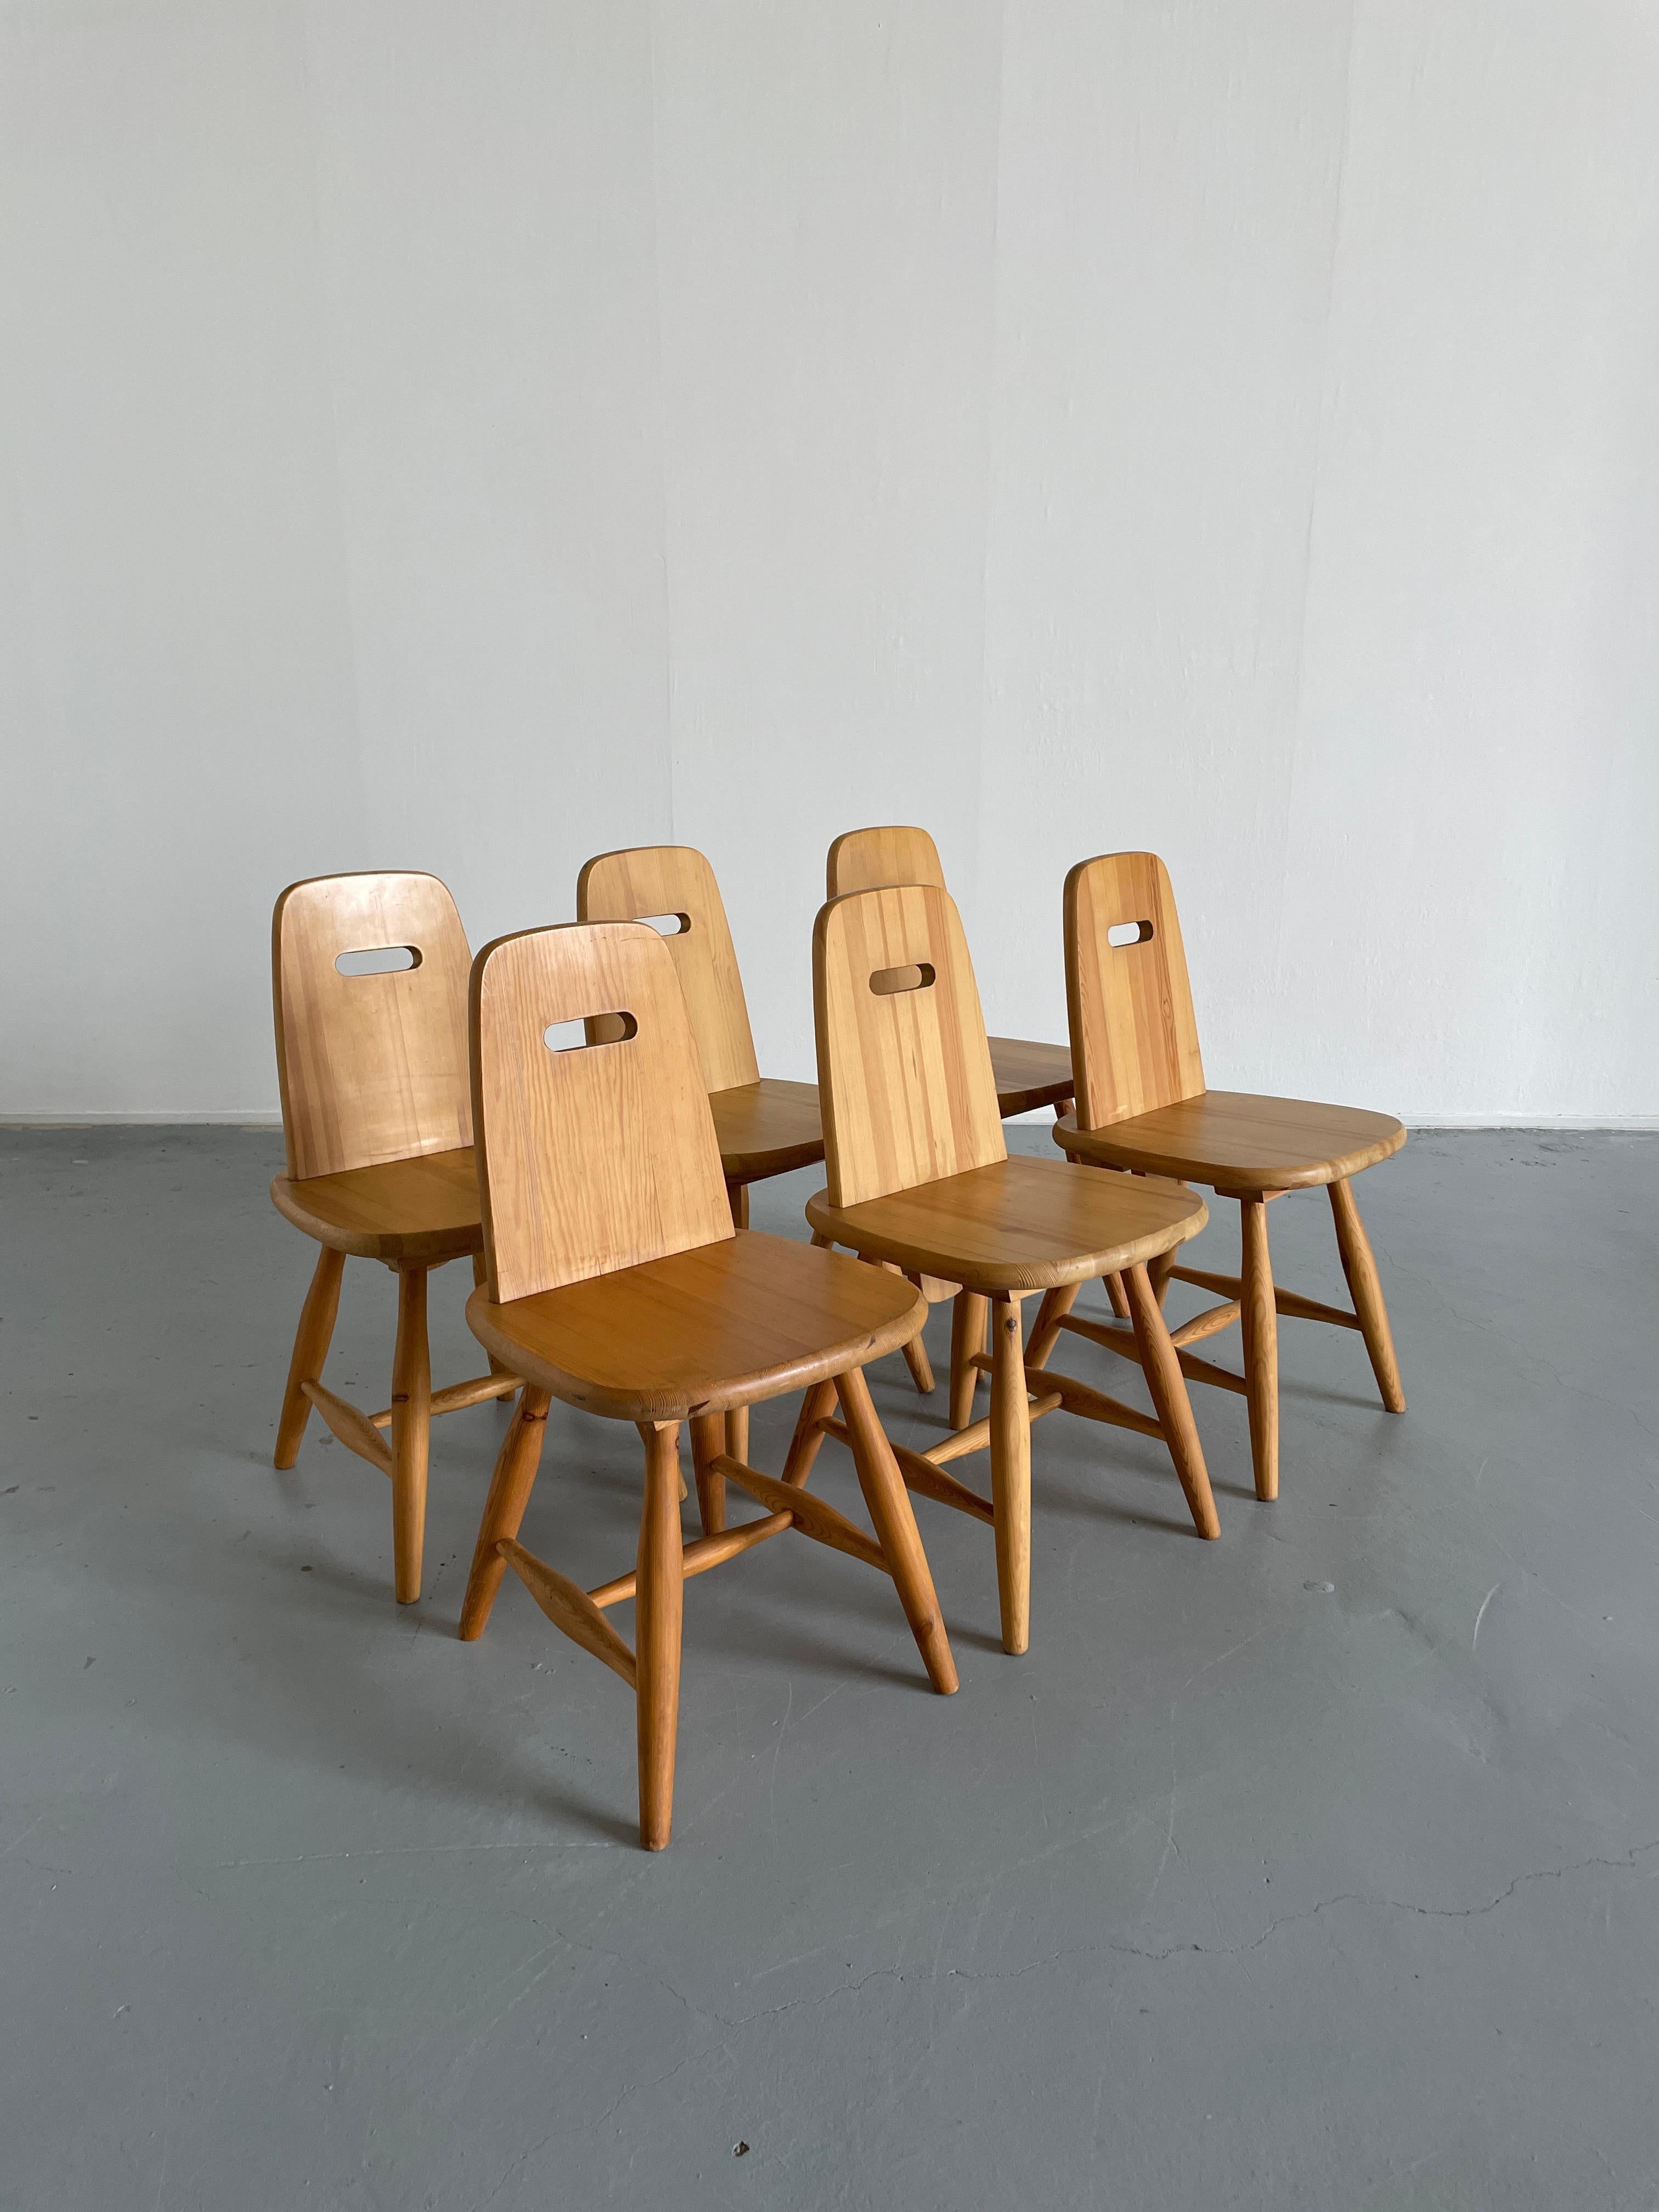 Mid-20th Century Set of 6 Eero Aarnio 'Pirtti' Wooden Dining Chairs in Solid Pine for Laukaan Puu